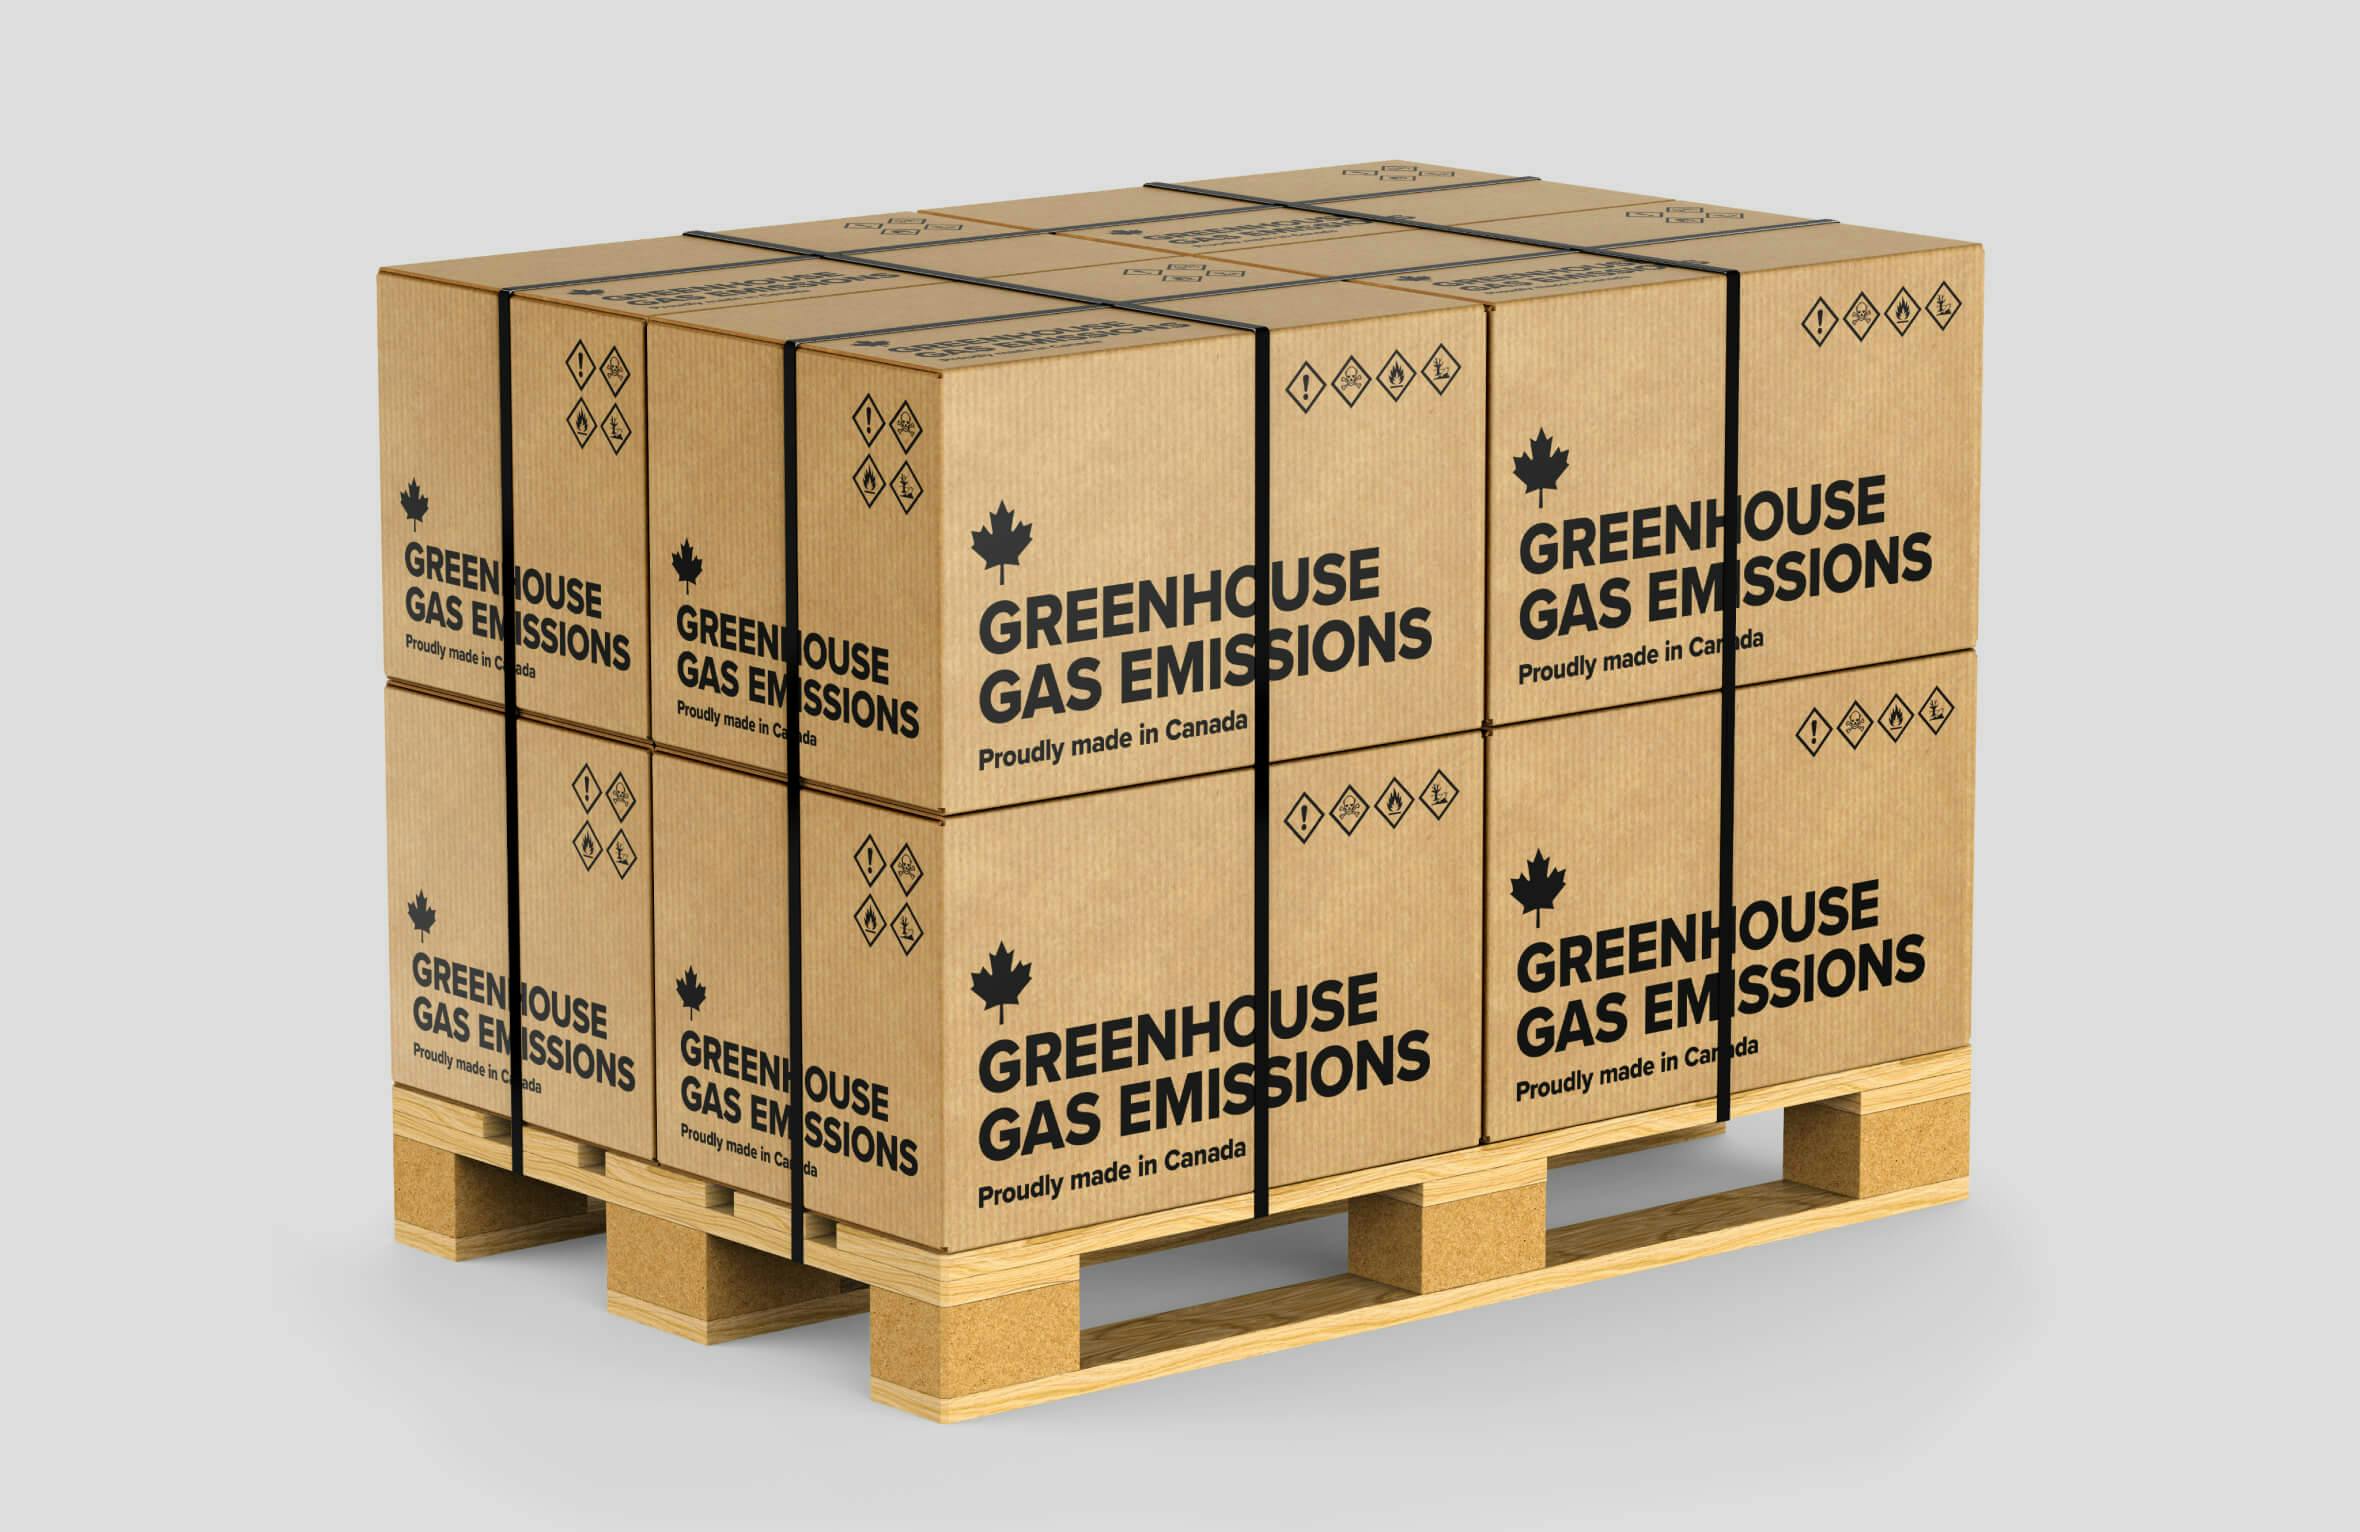 Mockup of a stack of branded cardboard boxes with labels that say "greenhouse gas emissions, proudly made in Canada" as a social commentary piece on climate change. Data released by the International Energy Agency in 2018 indicated that Canada was one of the top 10 greenhouse gas emitters in the world.